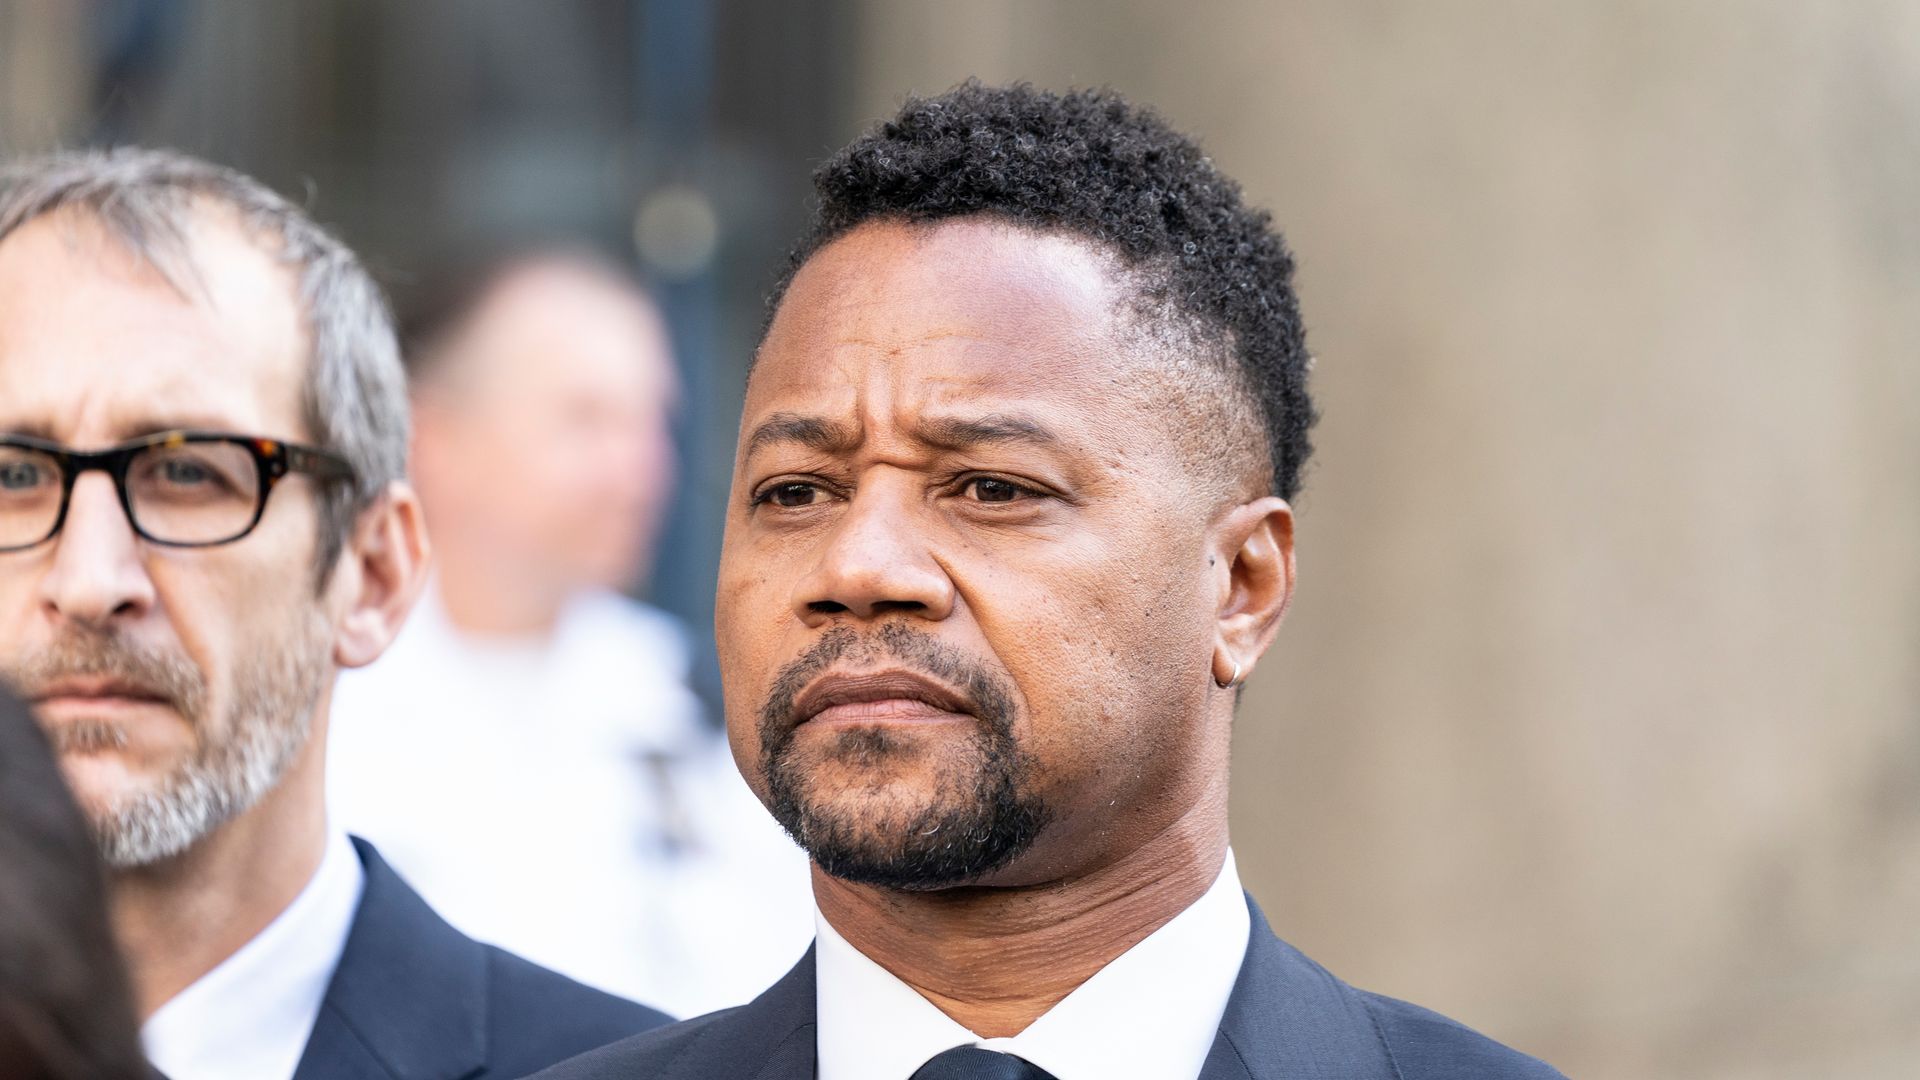 Cuba Gooding Jr. listens as attorney Mark Heller addresses press after arraignment in Manhattan's New York State Supreme Court.
Actor Cuba Gooding Jr. is facing charges of sexual abuse.